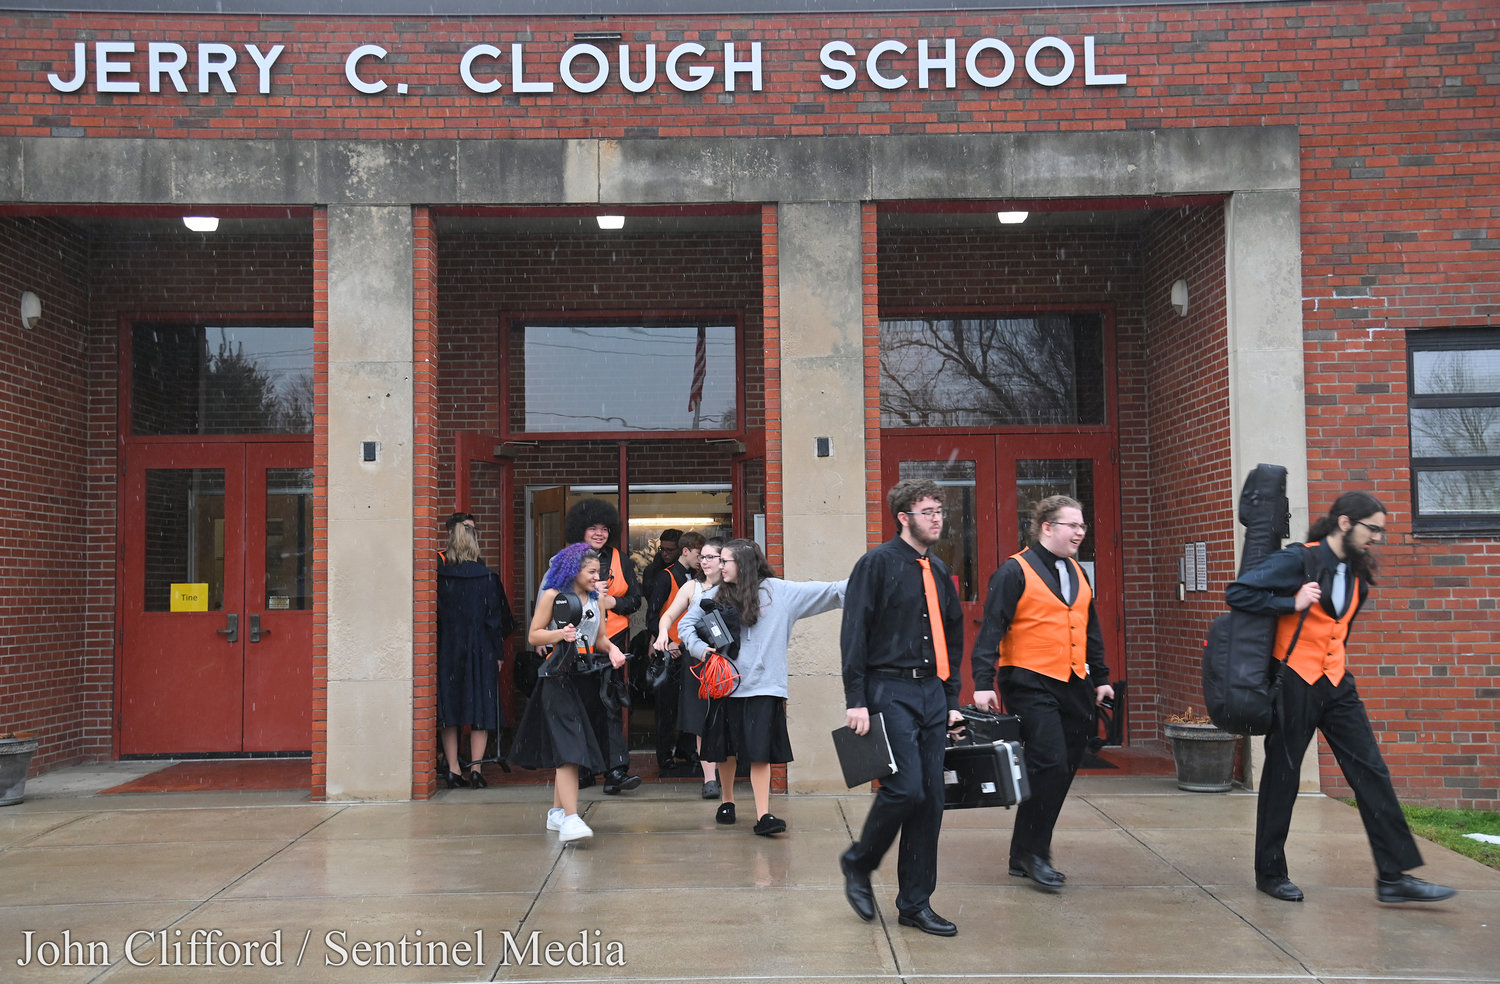 Rome Free Academy Rhapsody Show Choir leaving Clough School after their performance at the school and on to their next performance at Stokes Elementary School Friday, January 13, 2023.